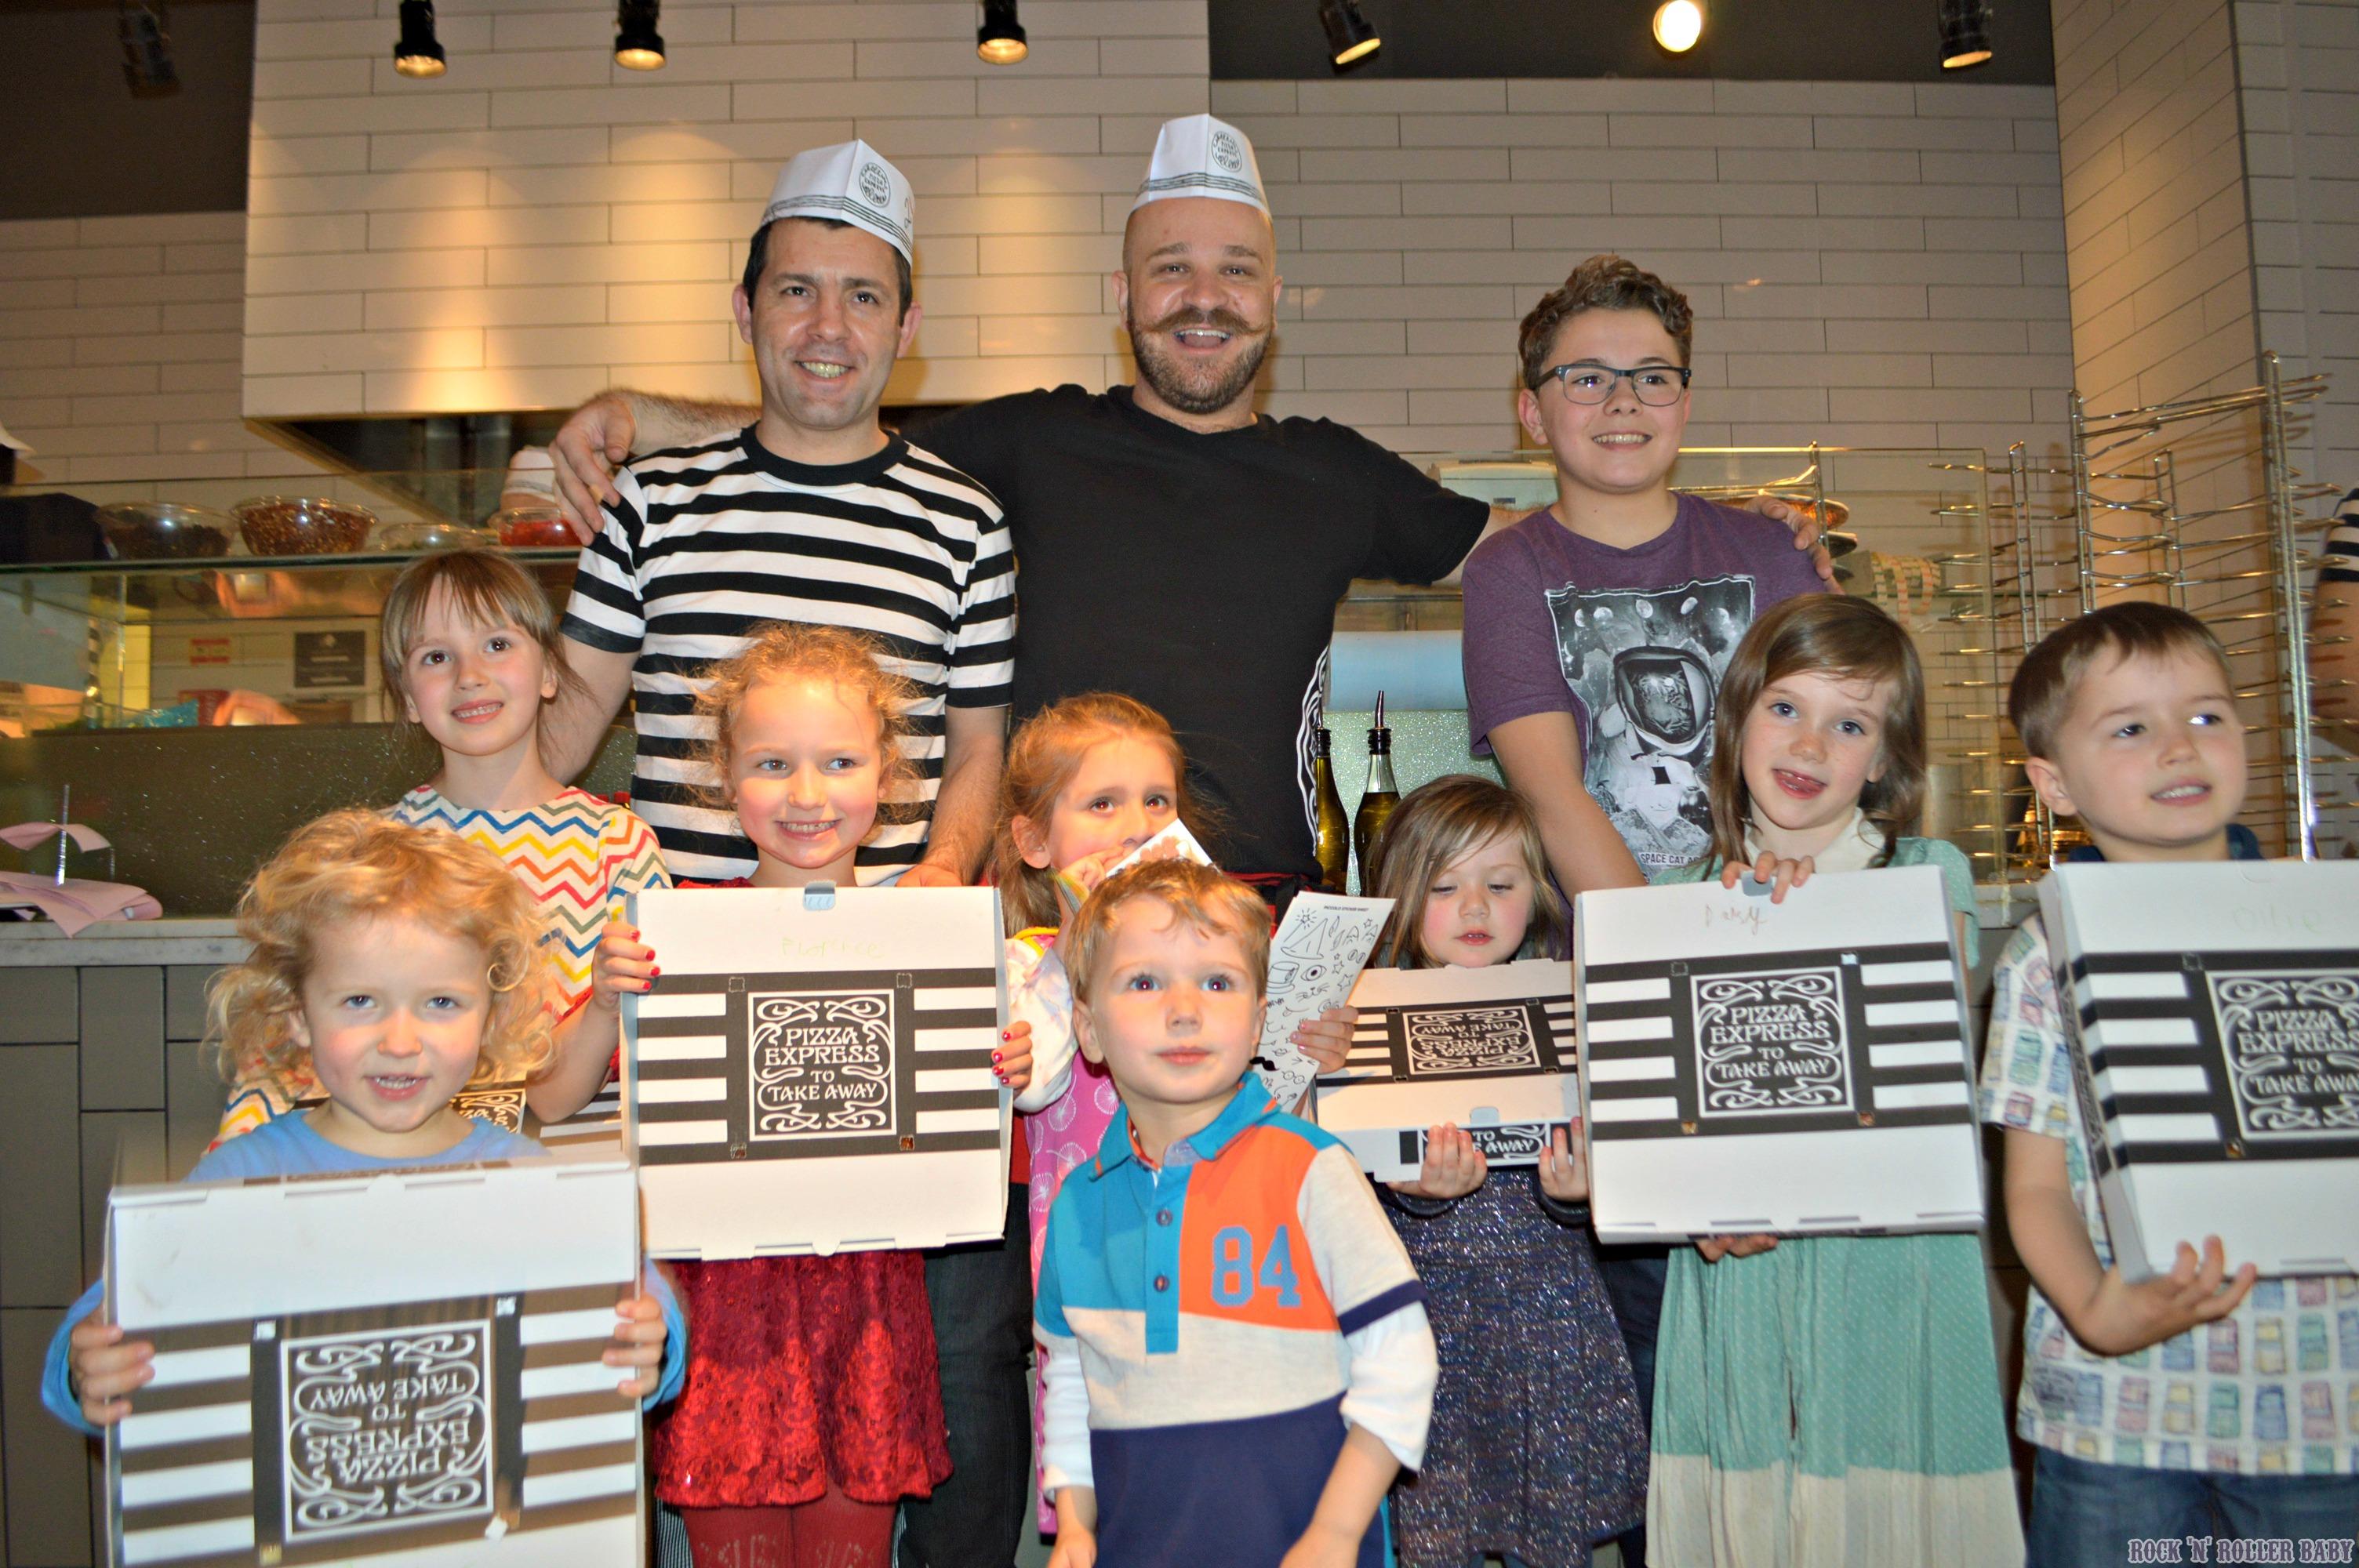 a-pizza-express-birthday-party-pizzaexpressfamily-review